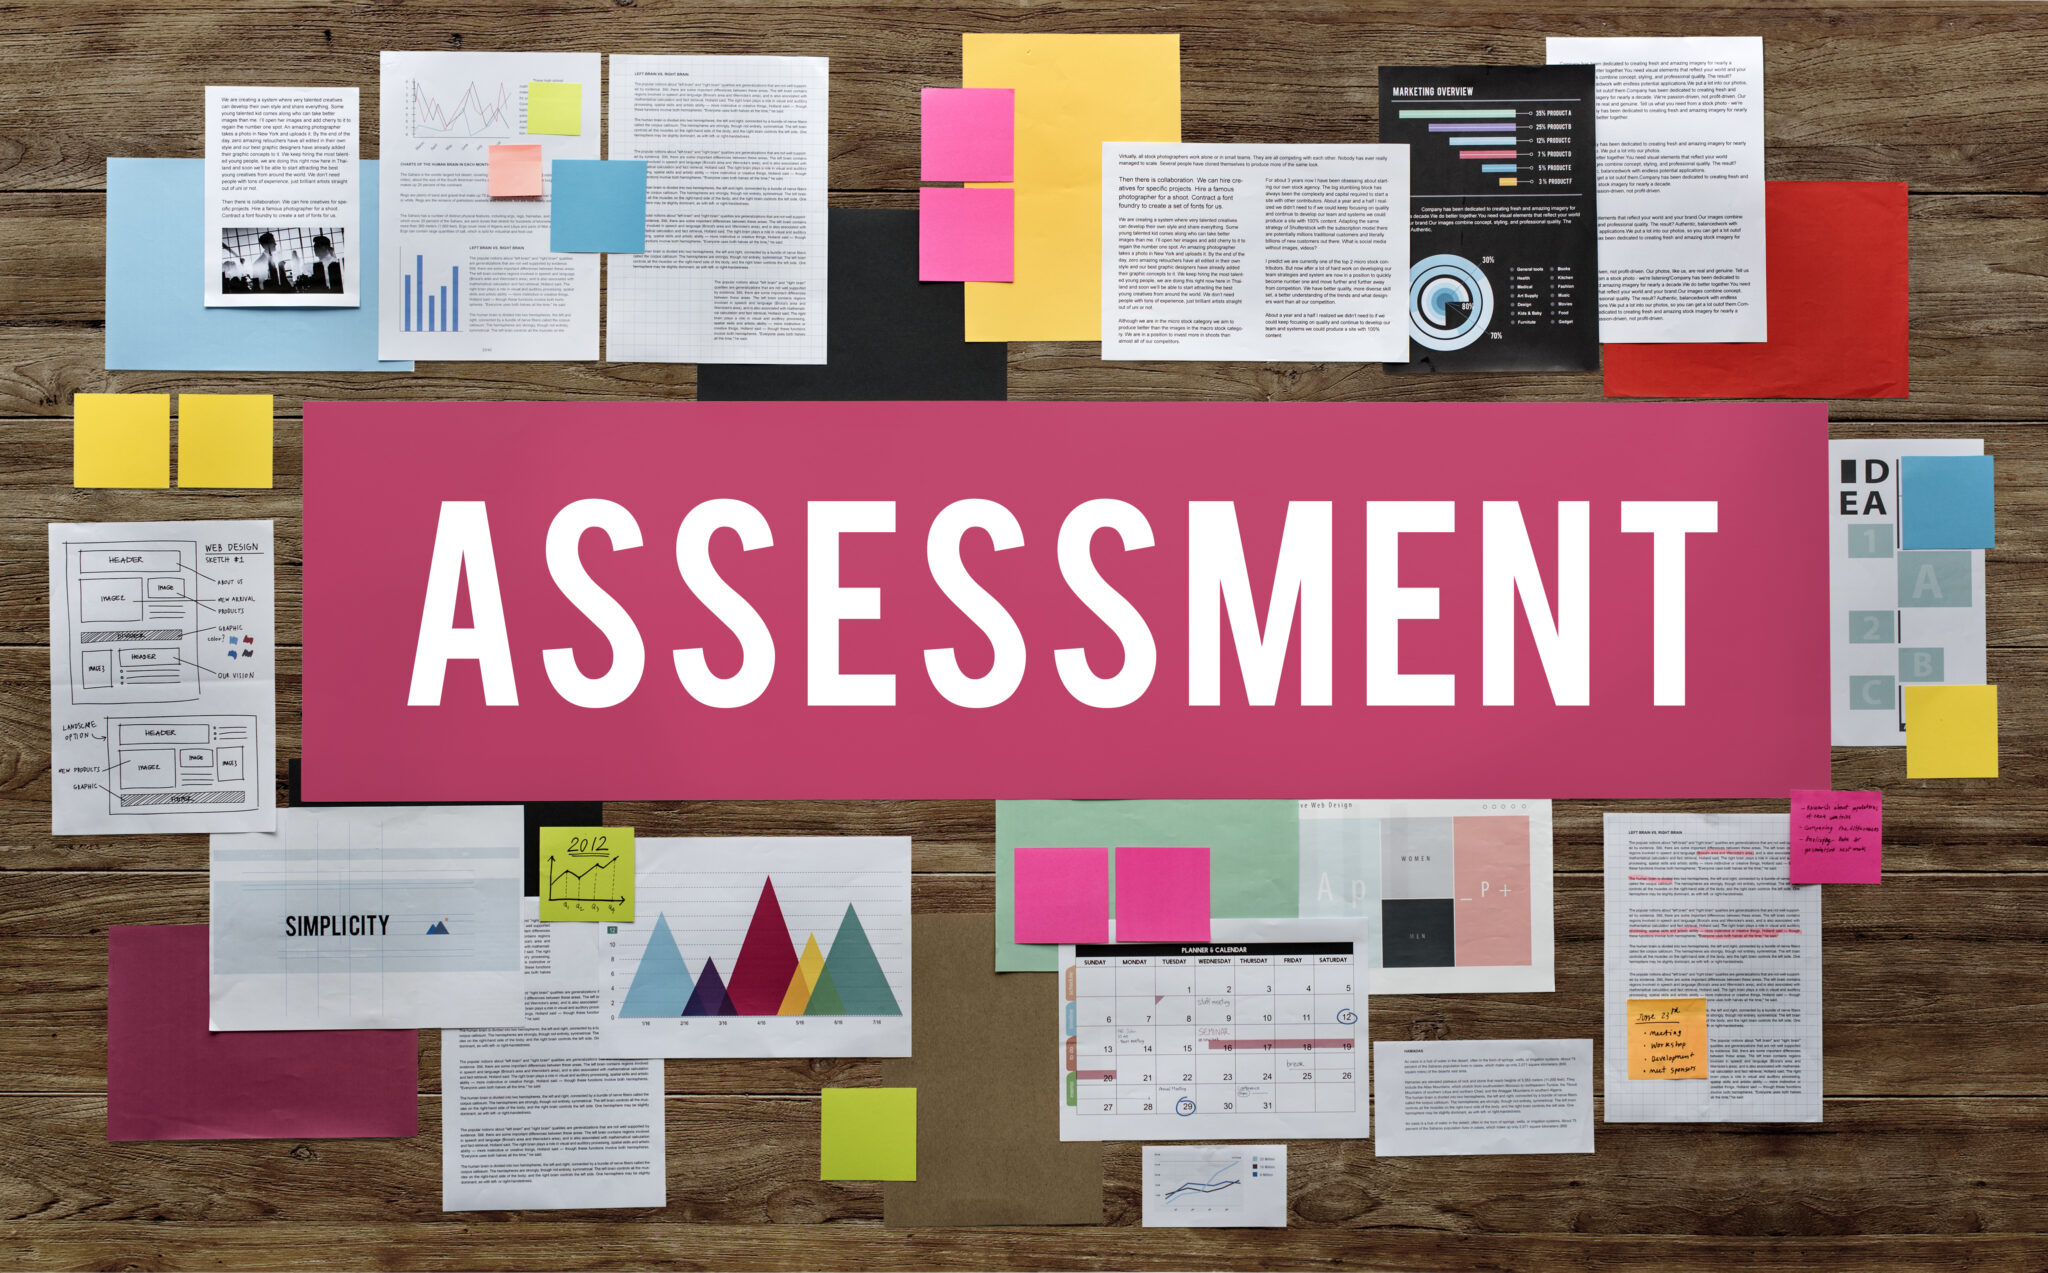 A diverse collage of assessment methods, including multiple-choice questions, essays, true/false questions, and short-answer questions, highlighting the importance of varied assessments in eLearning.